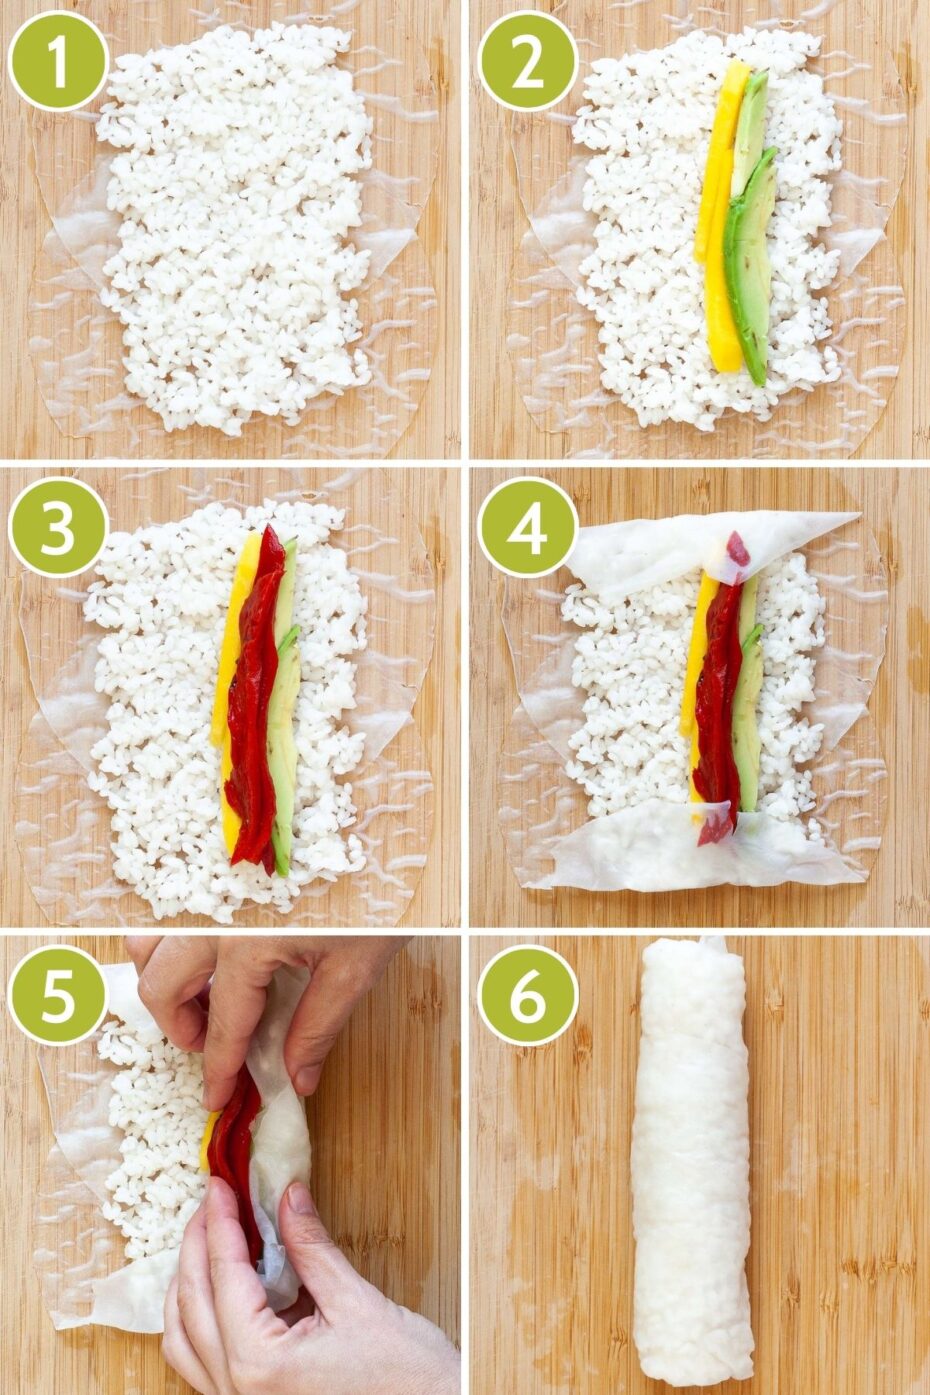 6 photo collage showing how to roll sushi in rice paper sheets and how to add the filling